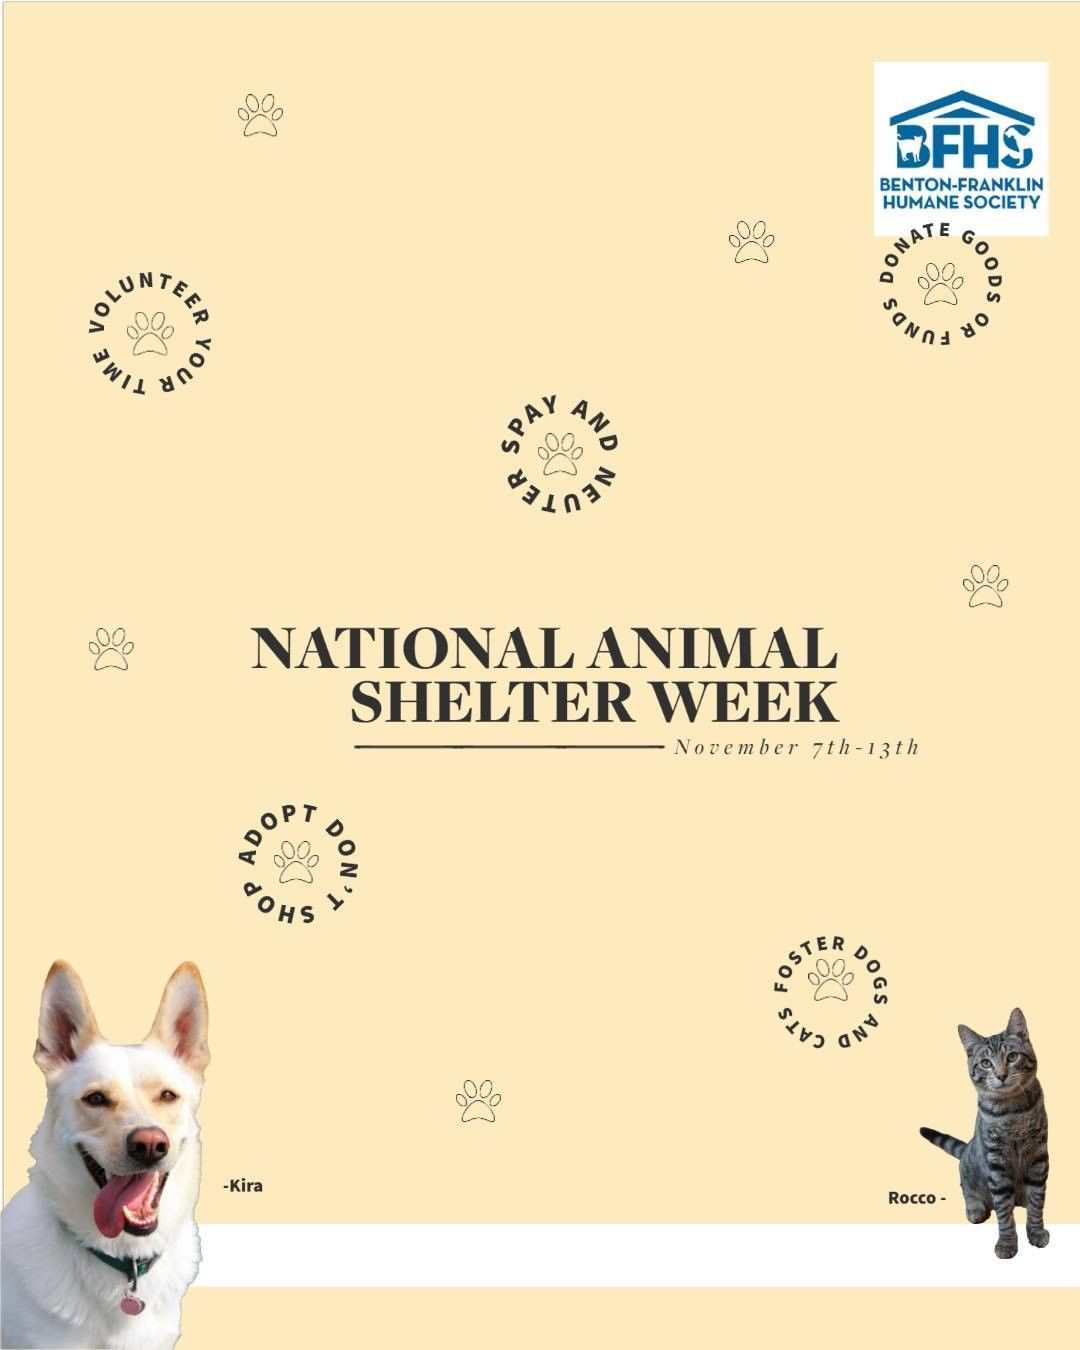 Happy National Animal Shelter Appreciation Week!  This week recognizes the shelters providing care that bridges the gap to adoption for millions (yes, millions!) of abandoned and stray animals.  It also recognizes the relentless, hard-work and incredible effort that goes into taking care of these animals!  There are so many ways to show your support - from sharing the importance of spaying & neutering pets to donating!  We appreciate the support of our community and look forward to serving you and the animals for years to come! 
For the latest information or to donate, please visit us at www.bfhs.com